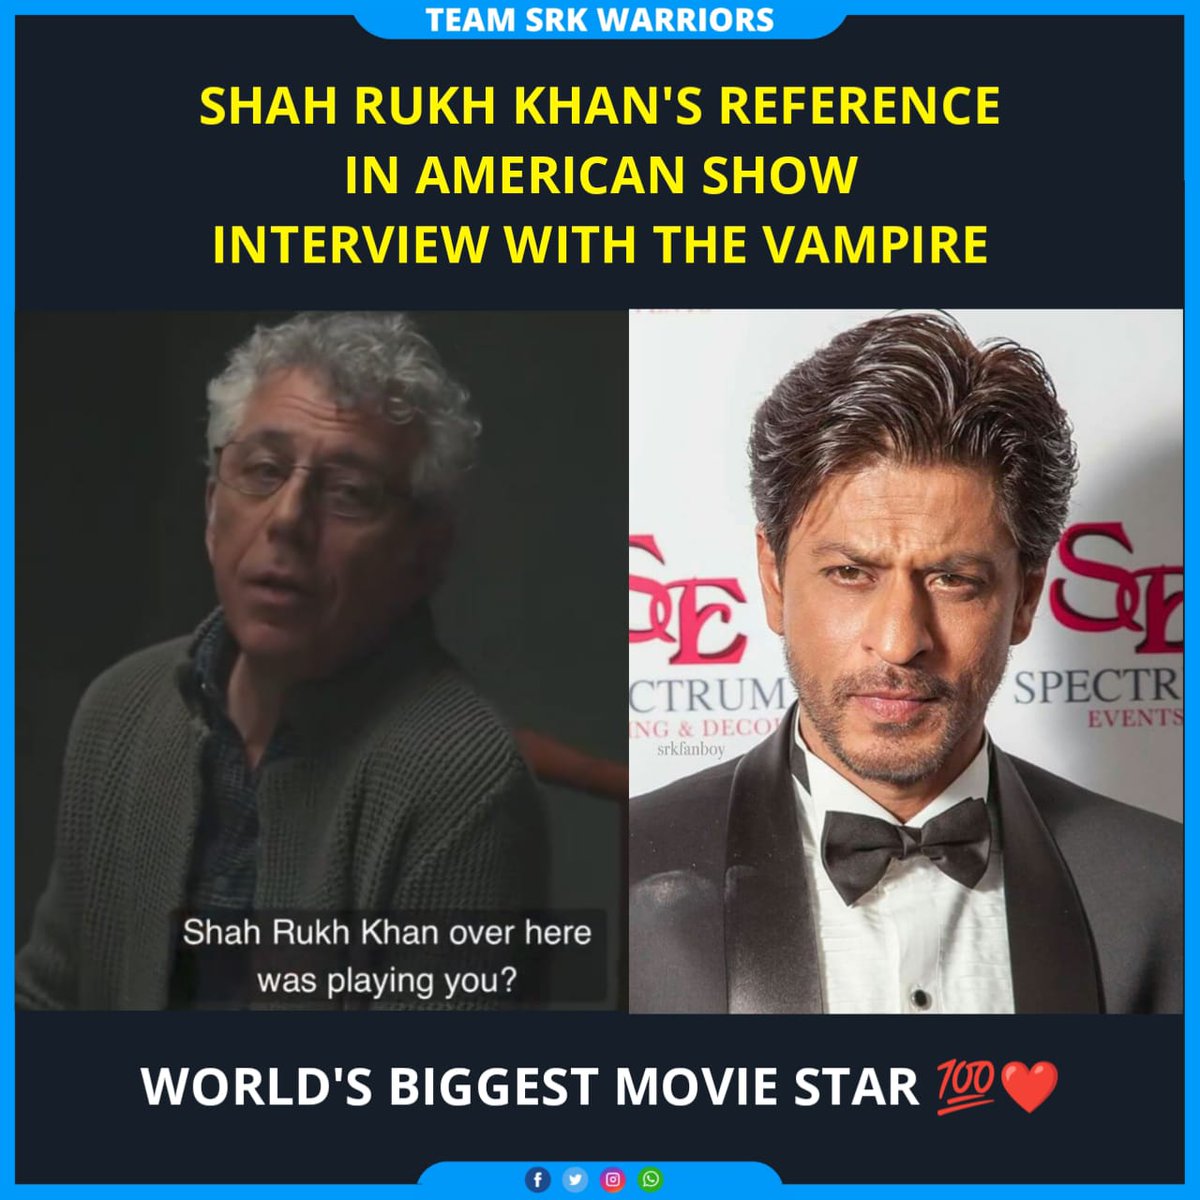 Shah Rukh Khan's reference in the American show 'Interview with The Vampire' 🔥😎 Truly World's Biggest Moviestar ♥️ #ShahRukhKhan